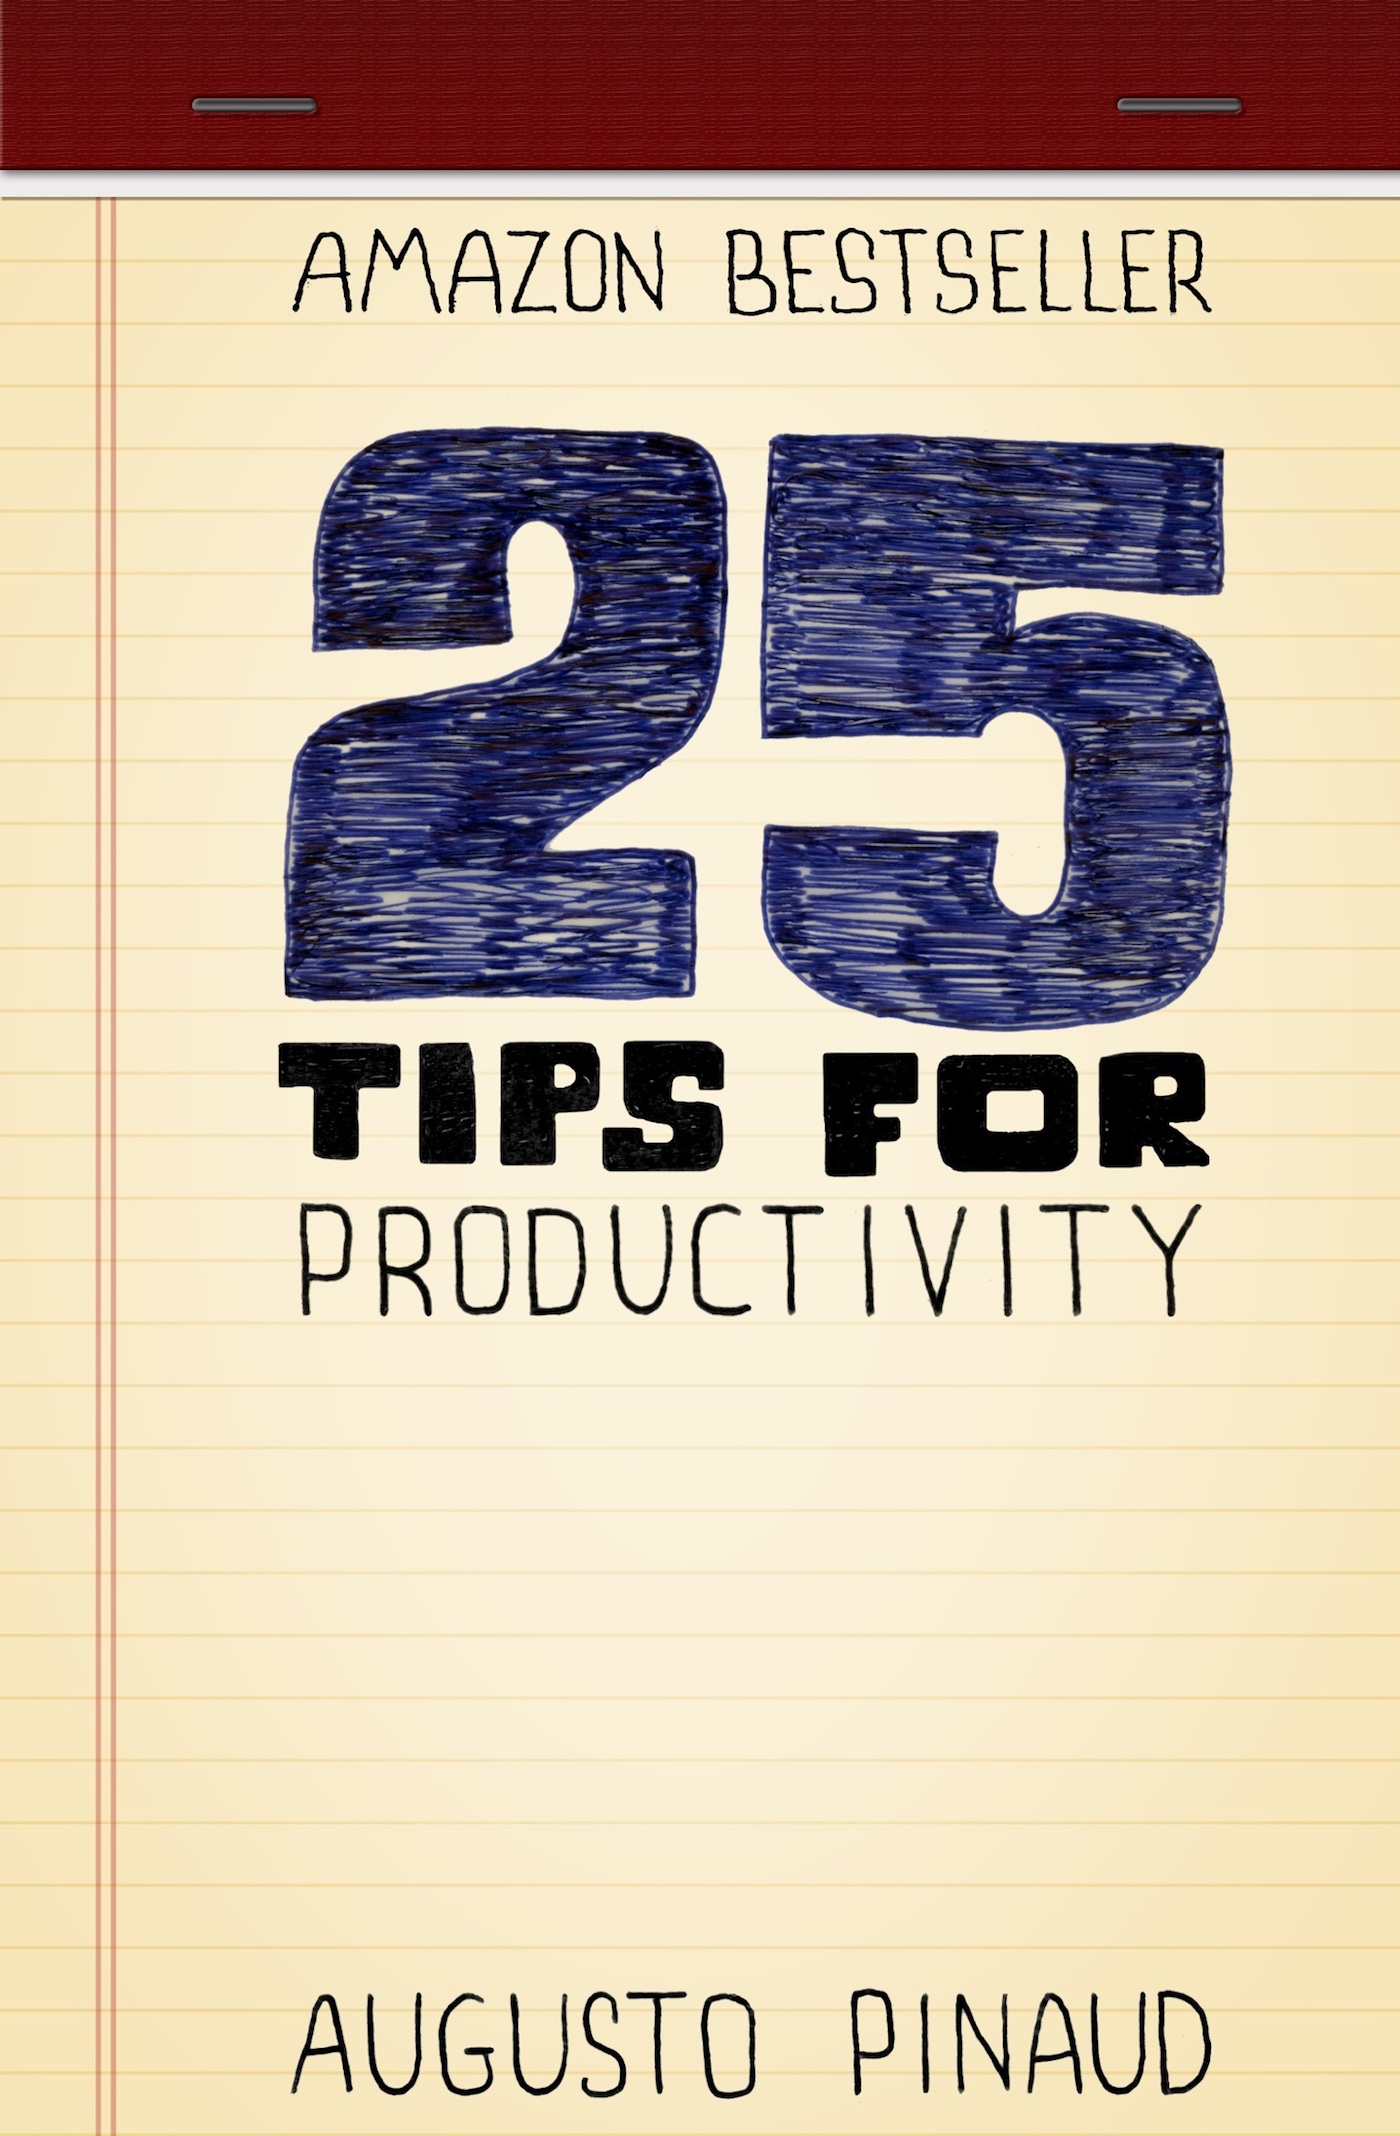 25 Tips for Productivity